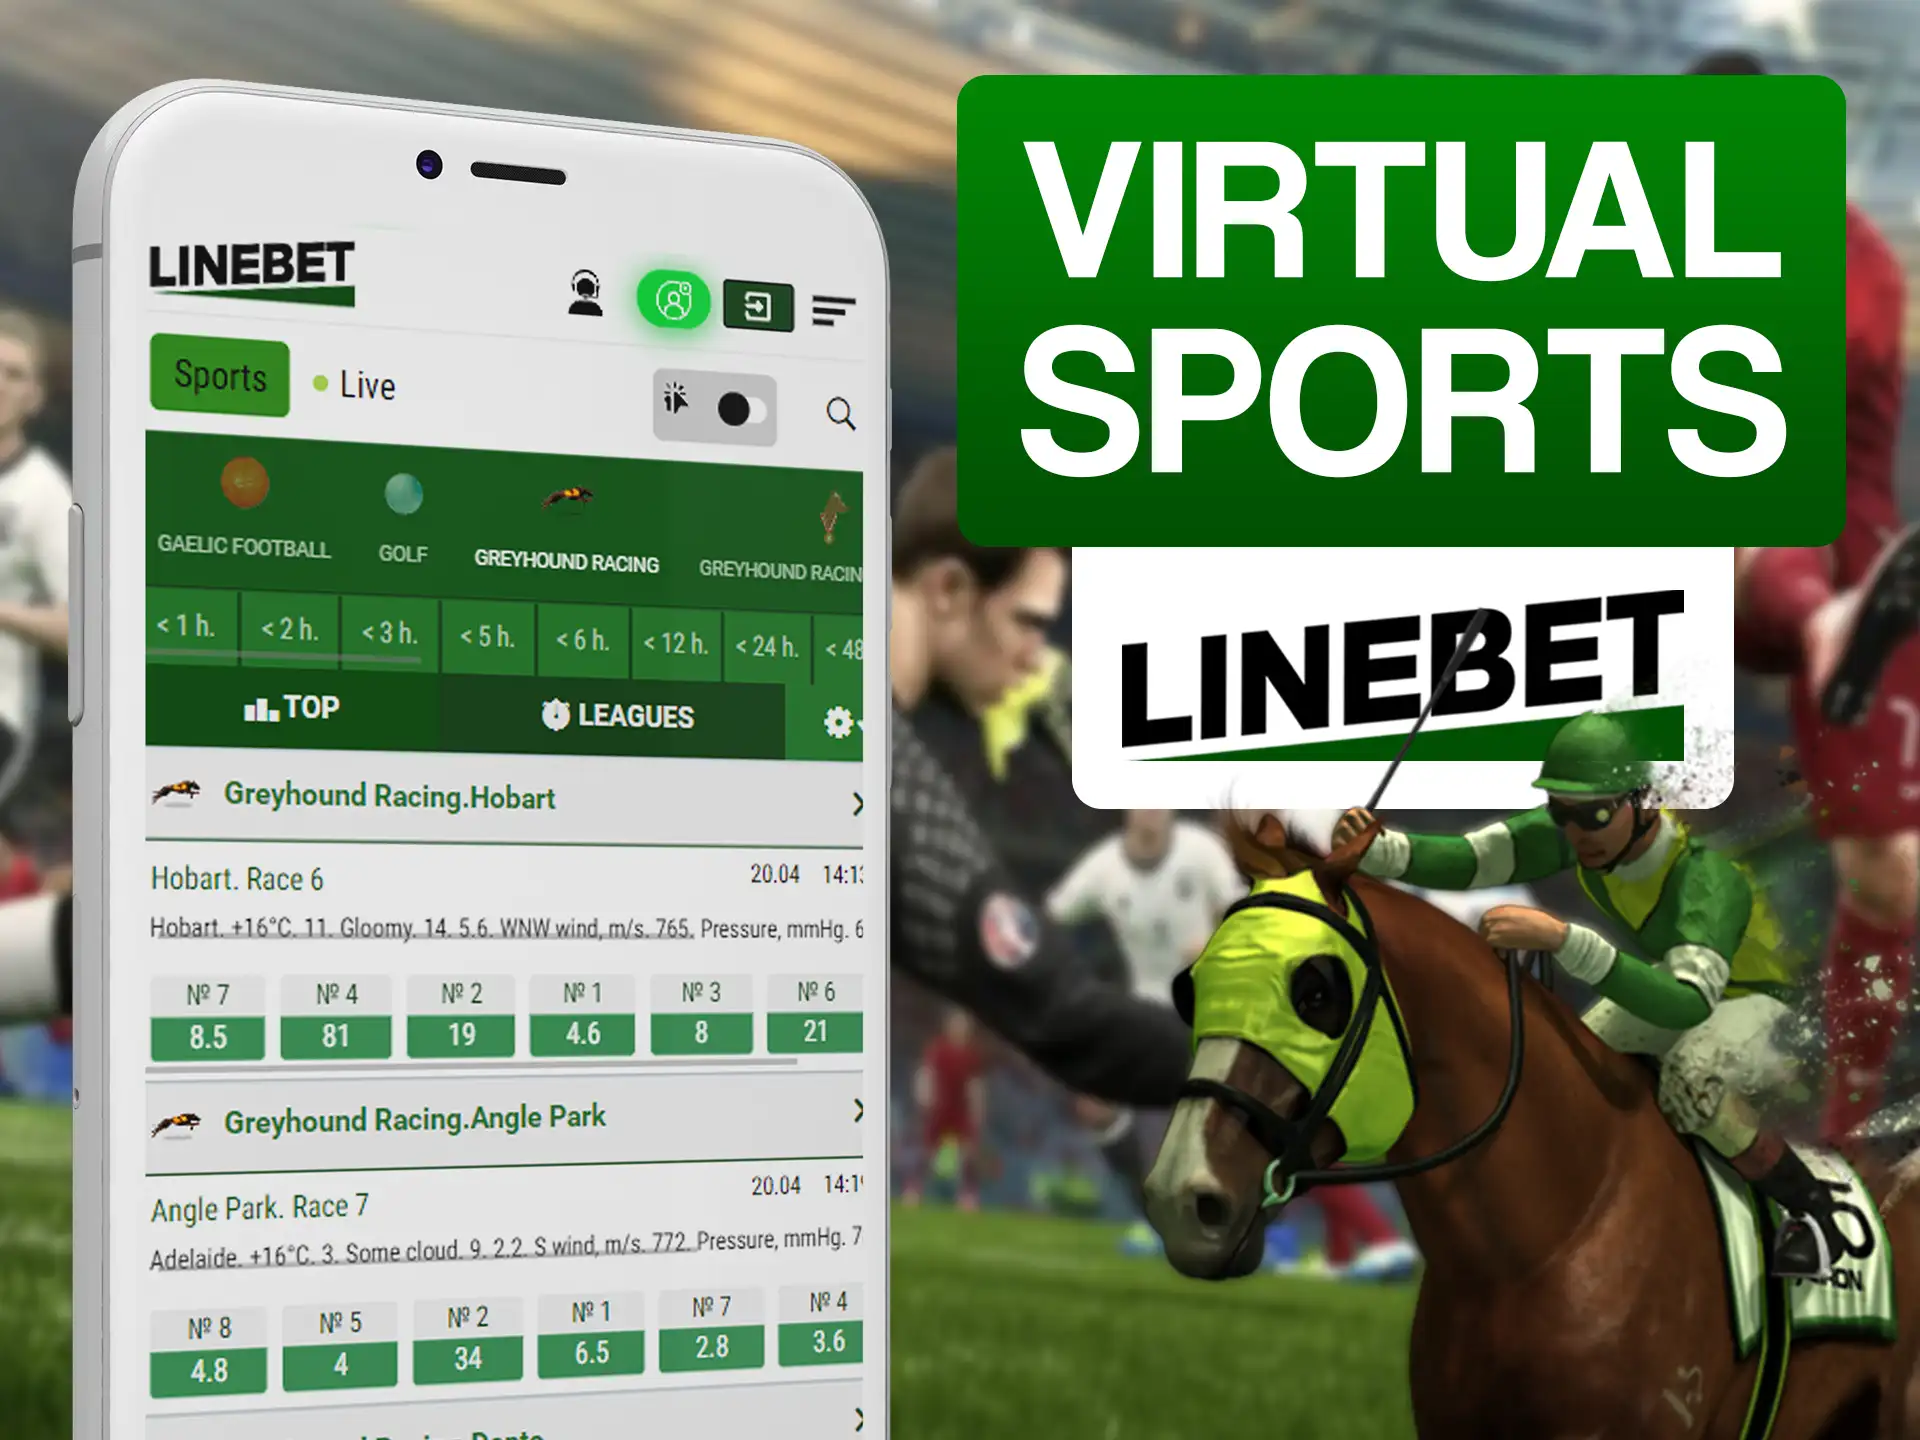 Bet on new exotic virtual sports at Linebet.